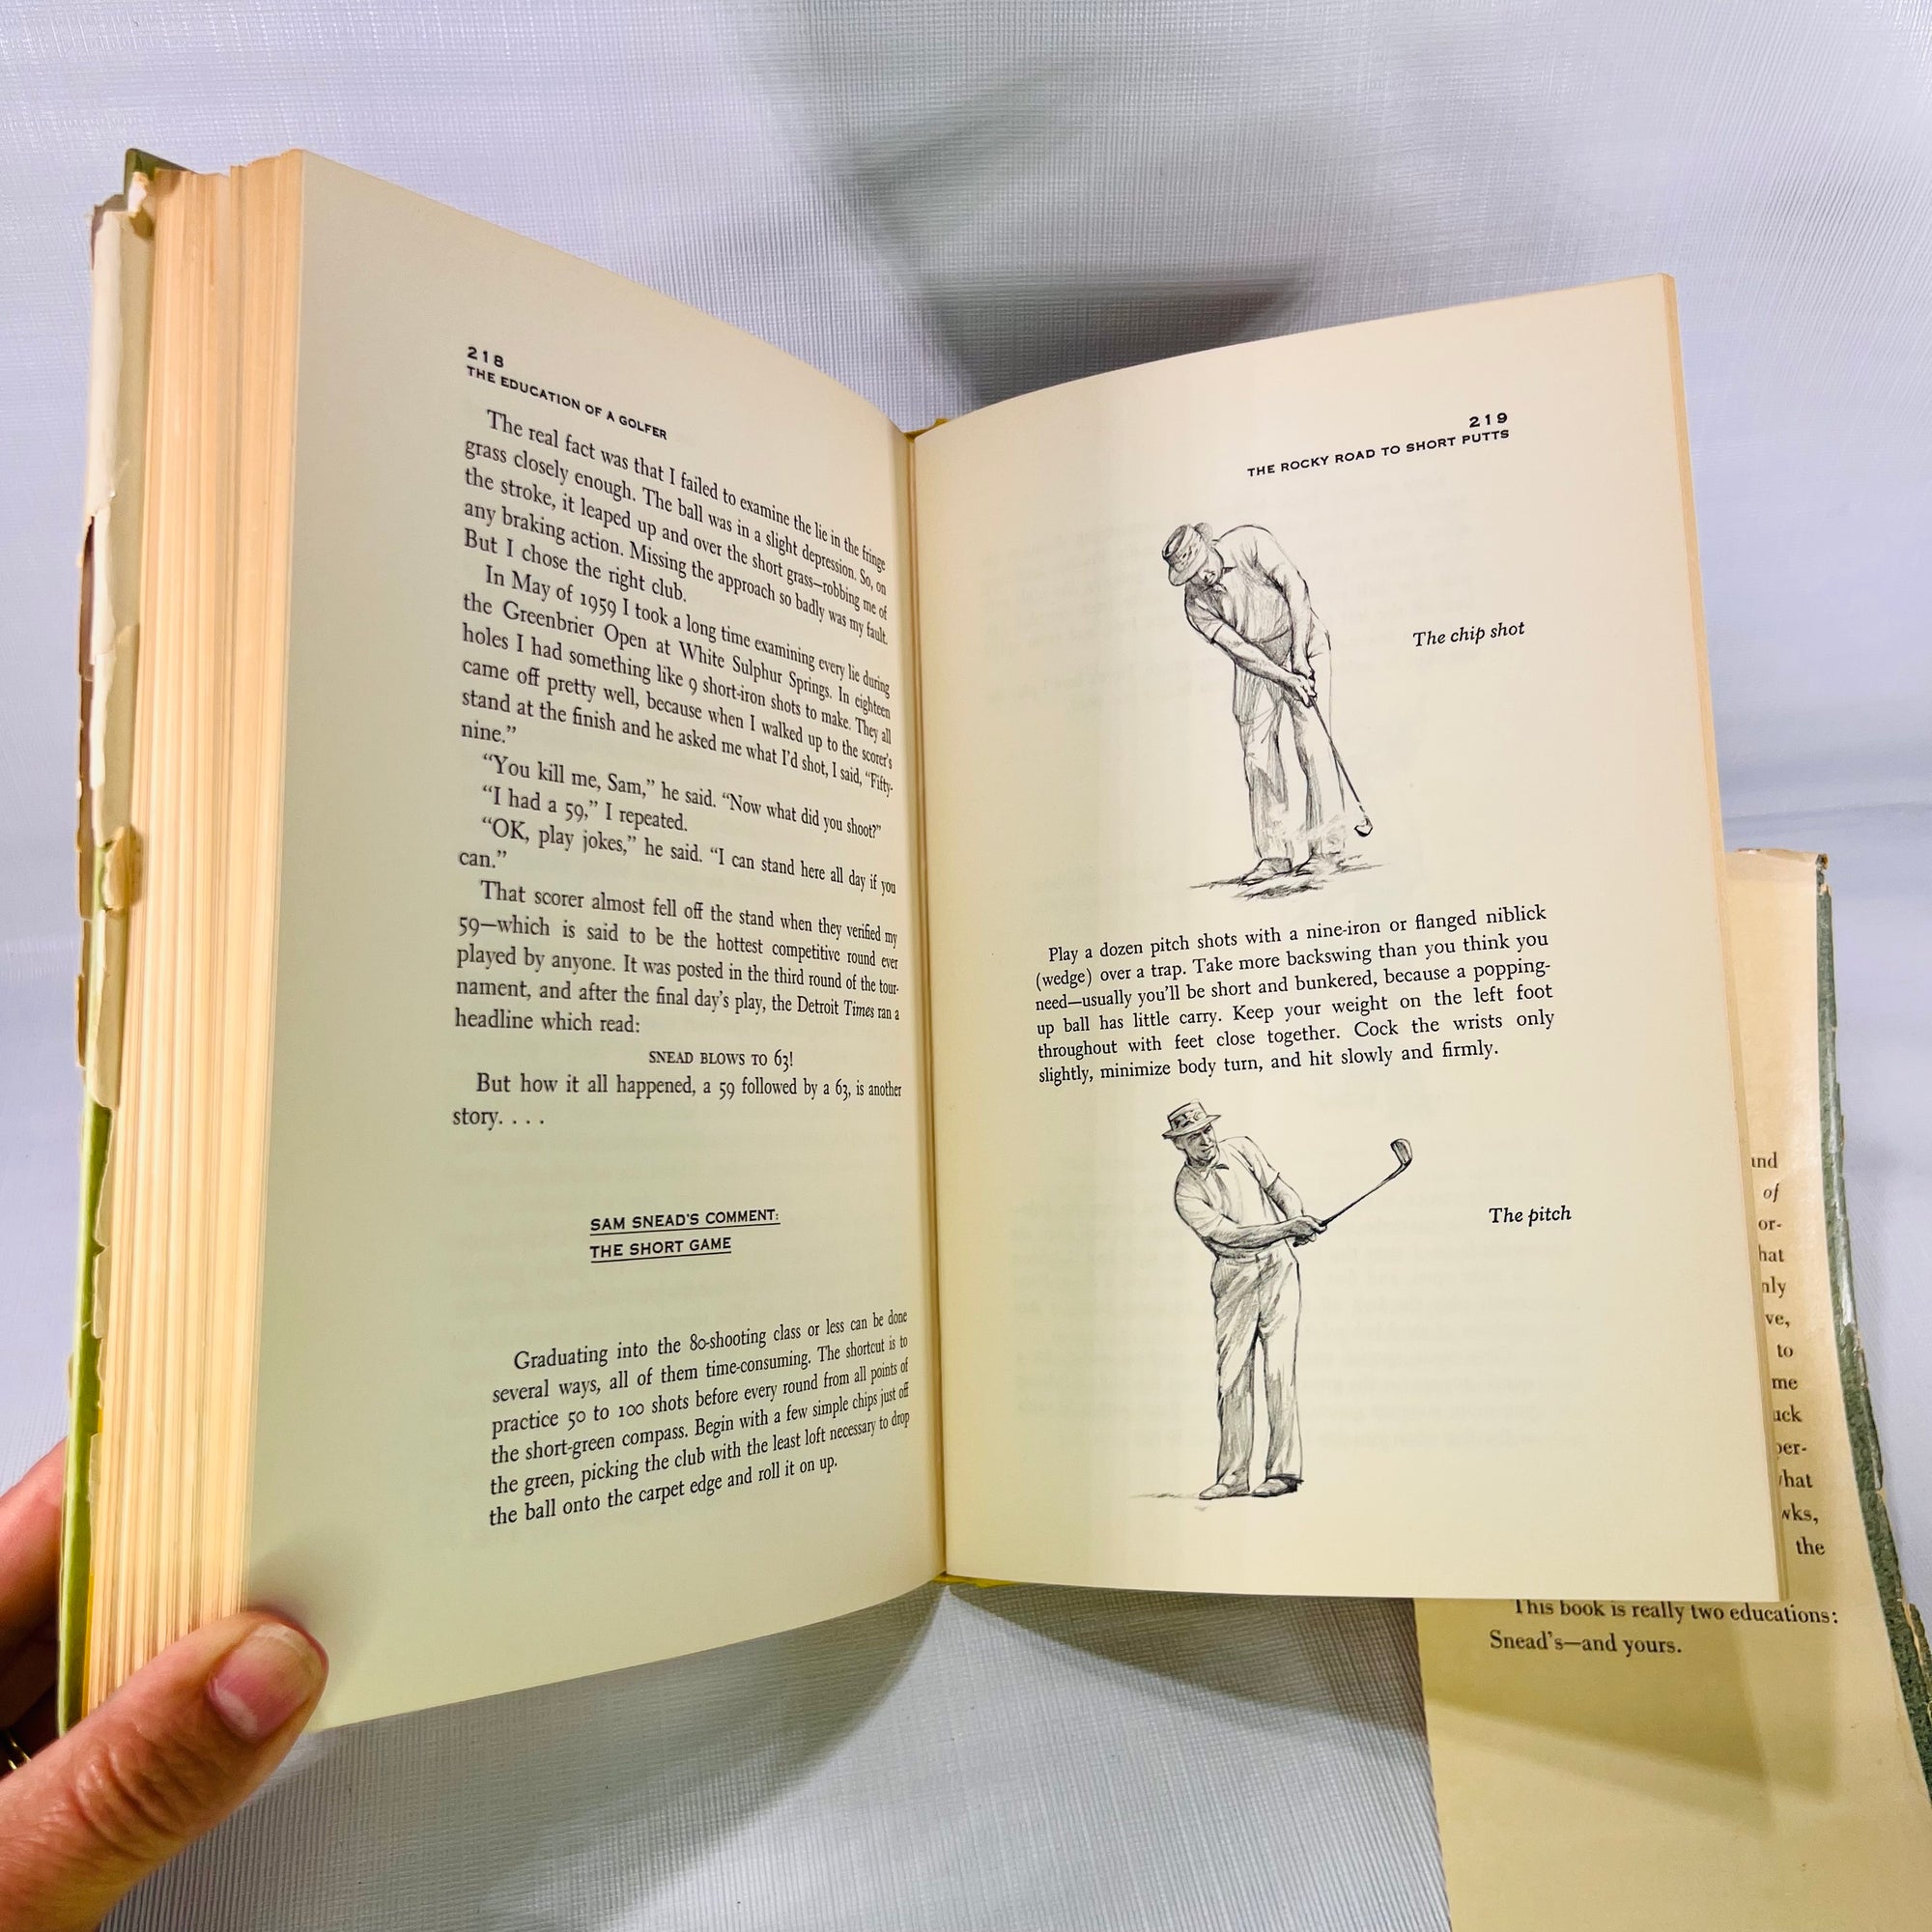 The Education of a Golfer by Sam Snead with All Stump 1962 First Printing Simon and Shuster